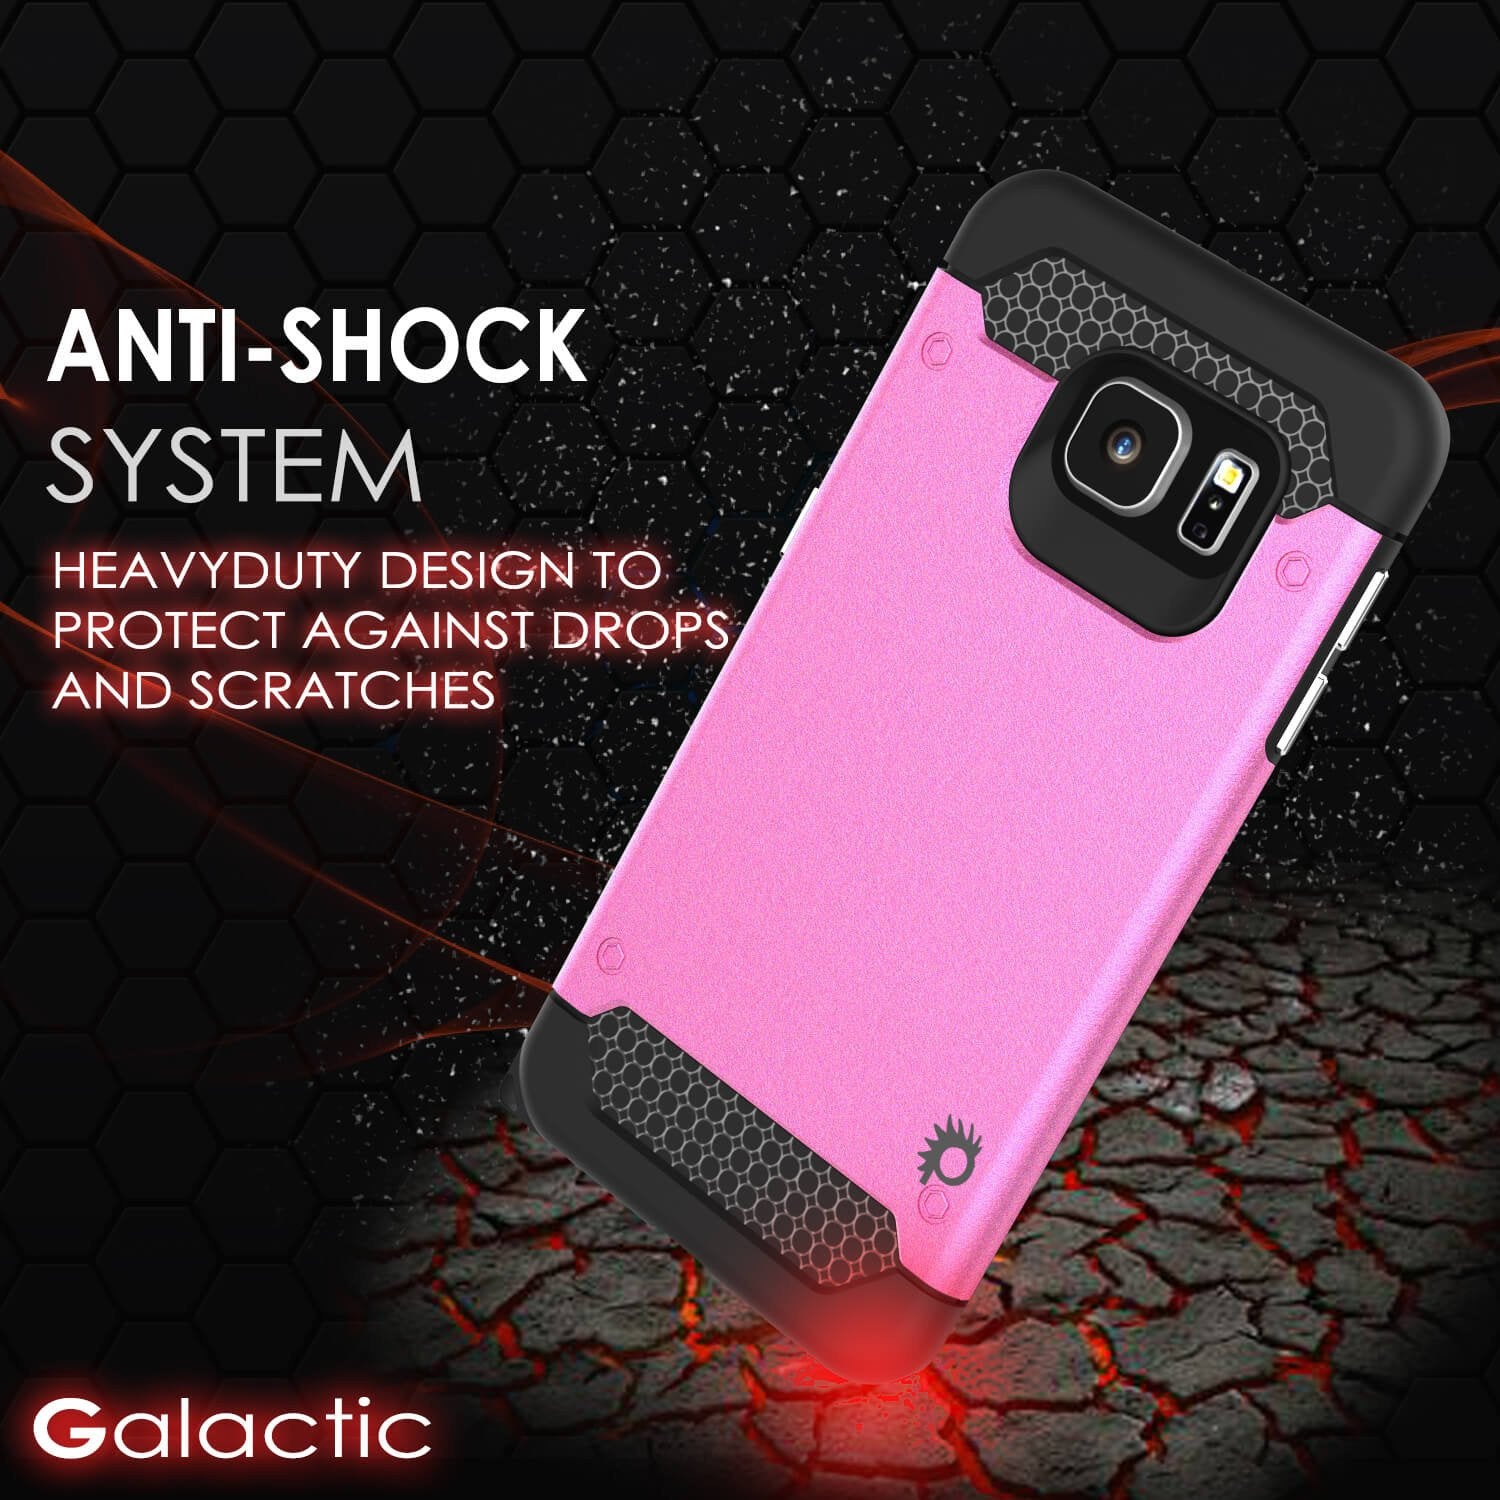 Galaxy s6 EDGE Plus Case PunkCase Galactic Pink Series Slim Armor Soft Cover w/ Screen Protector